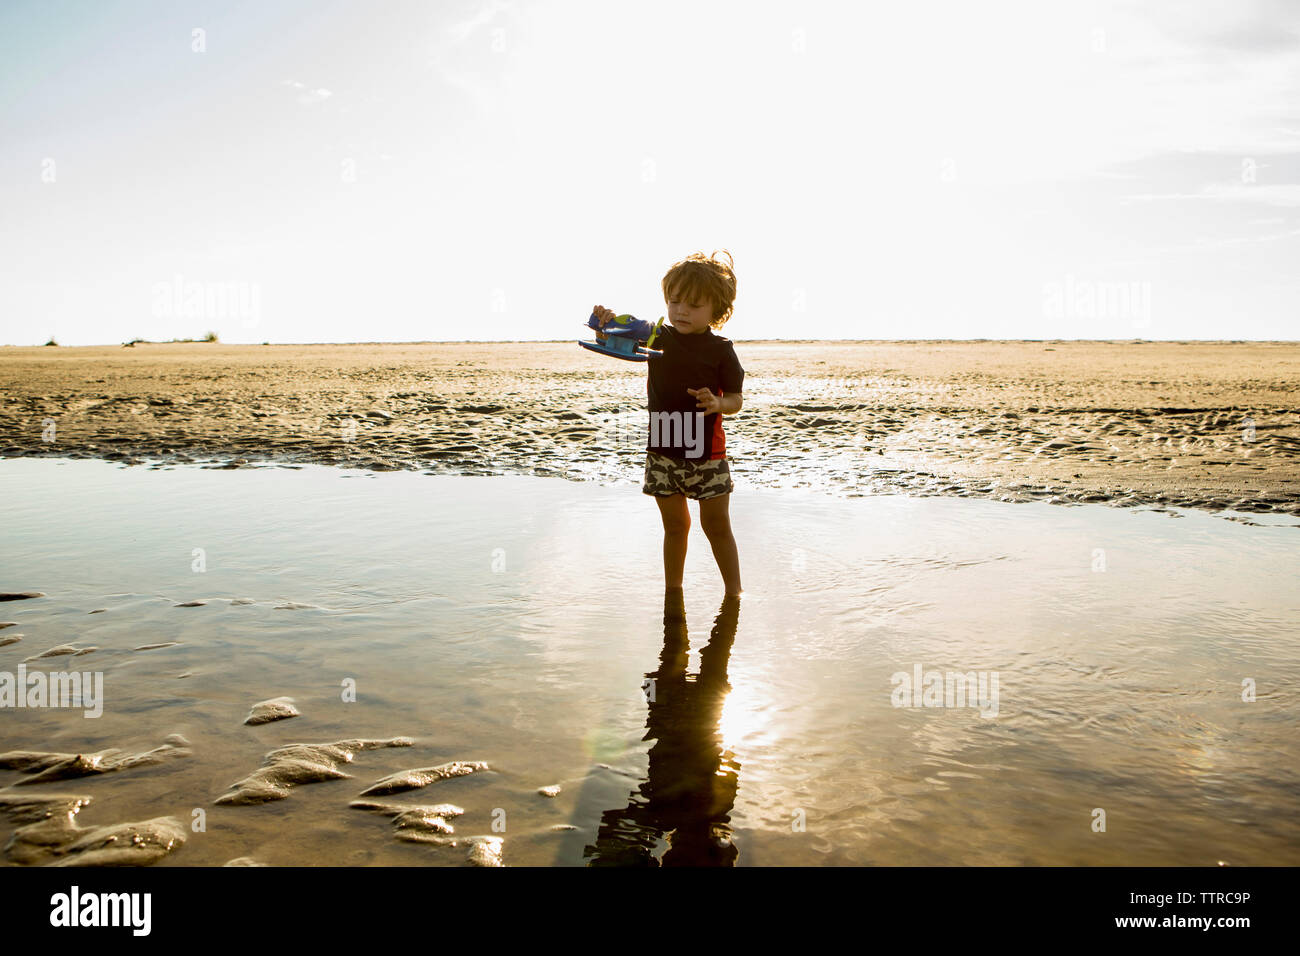 Boy playing with toy while standing in water at beach Stock Photo